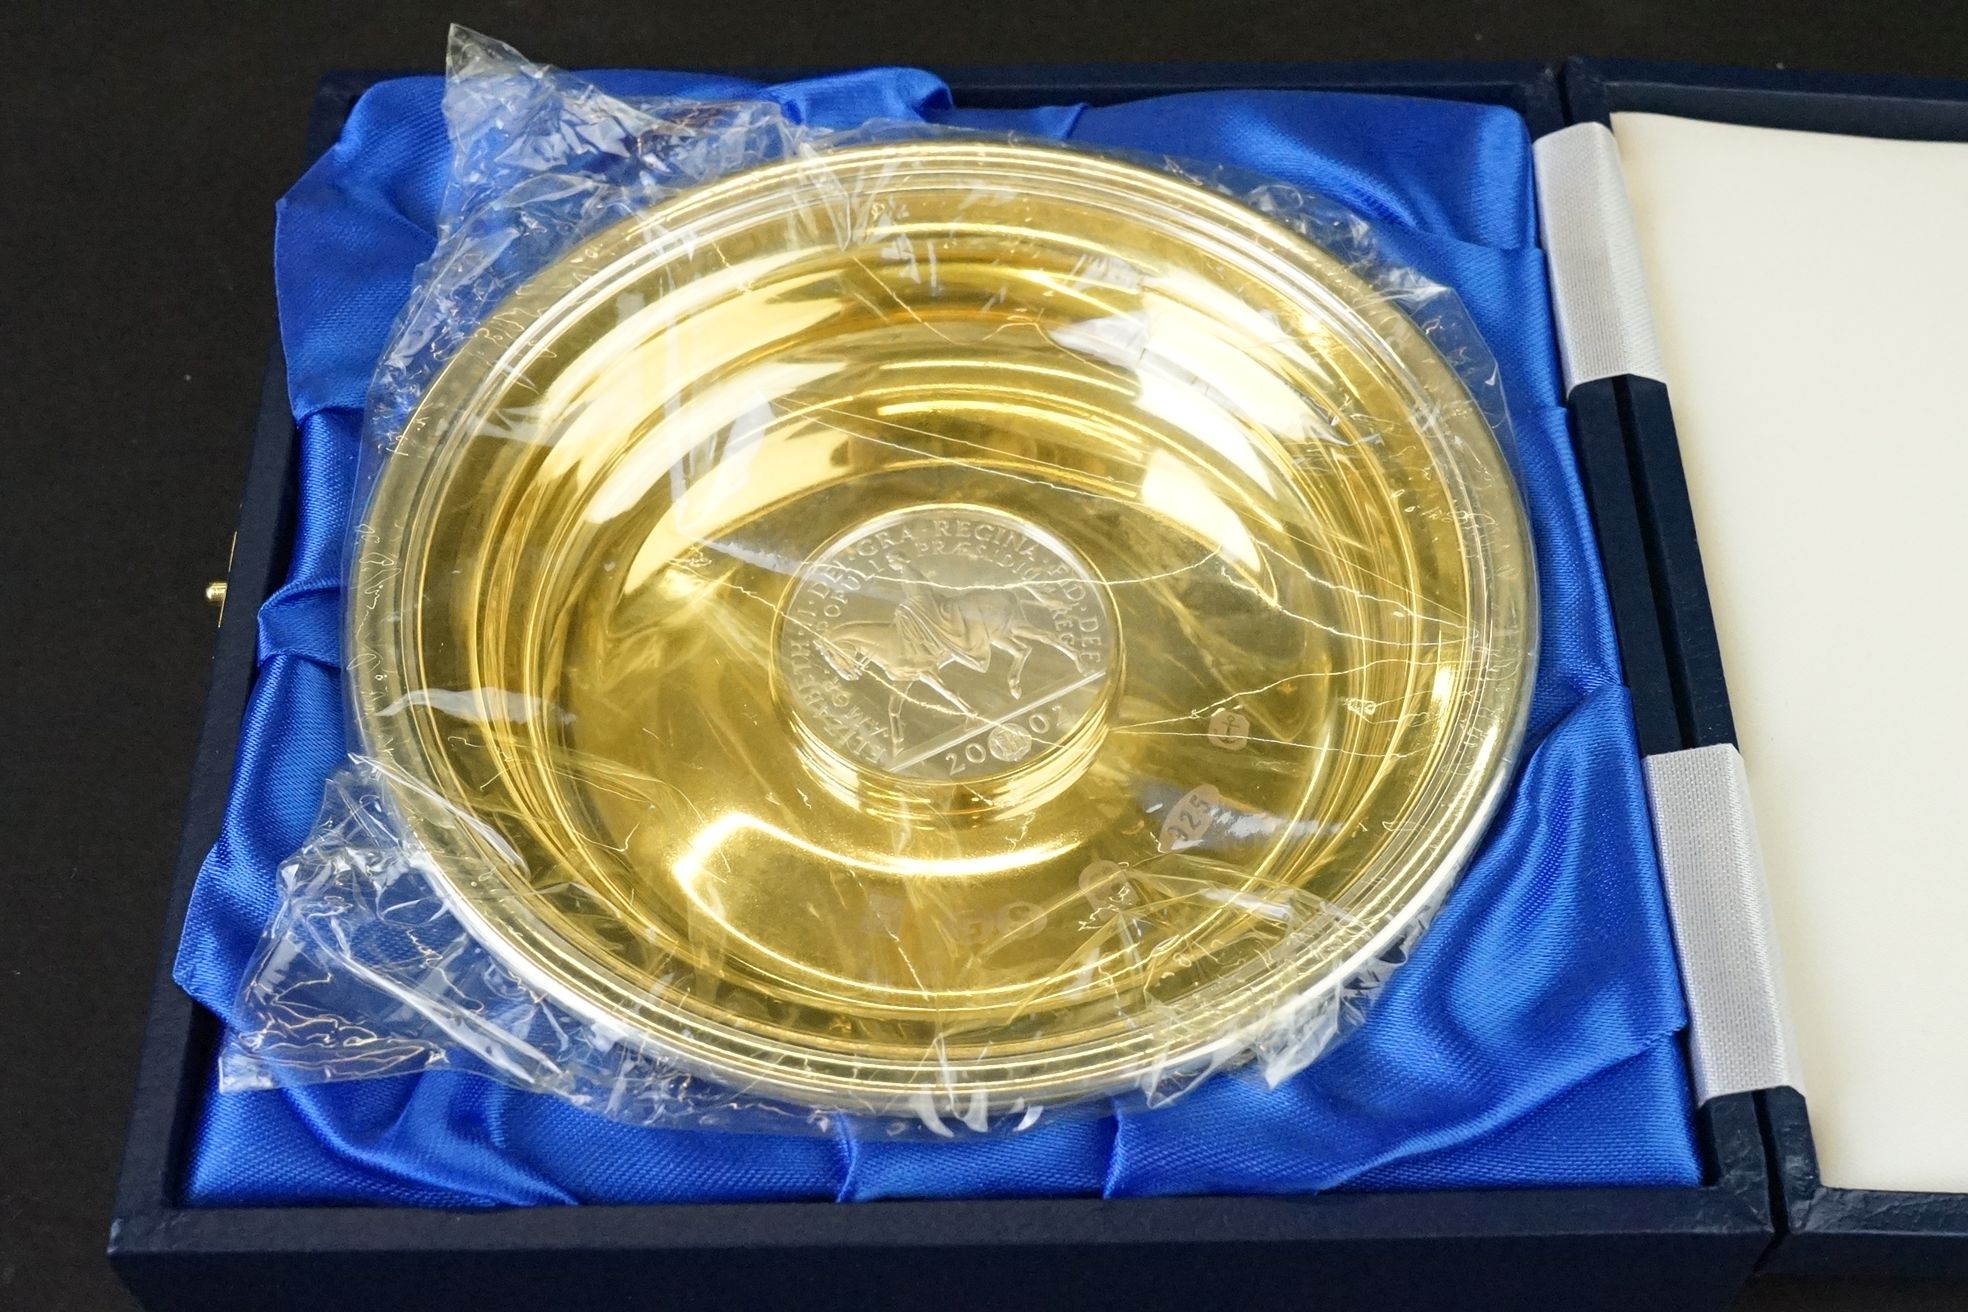 Royal Mint silver parcel gilt Jubilee dish, limited edition, no. 37/500, Elizabeth II £5 coin to - Image 2 of 7